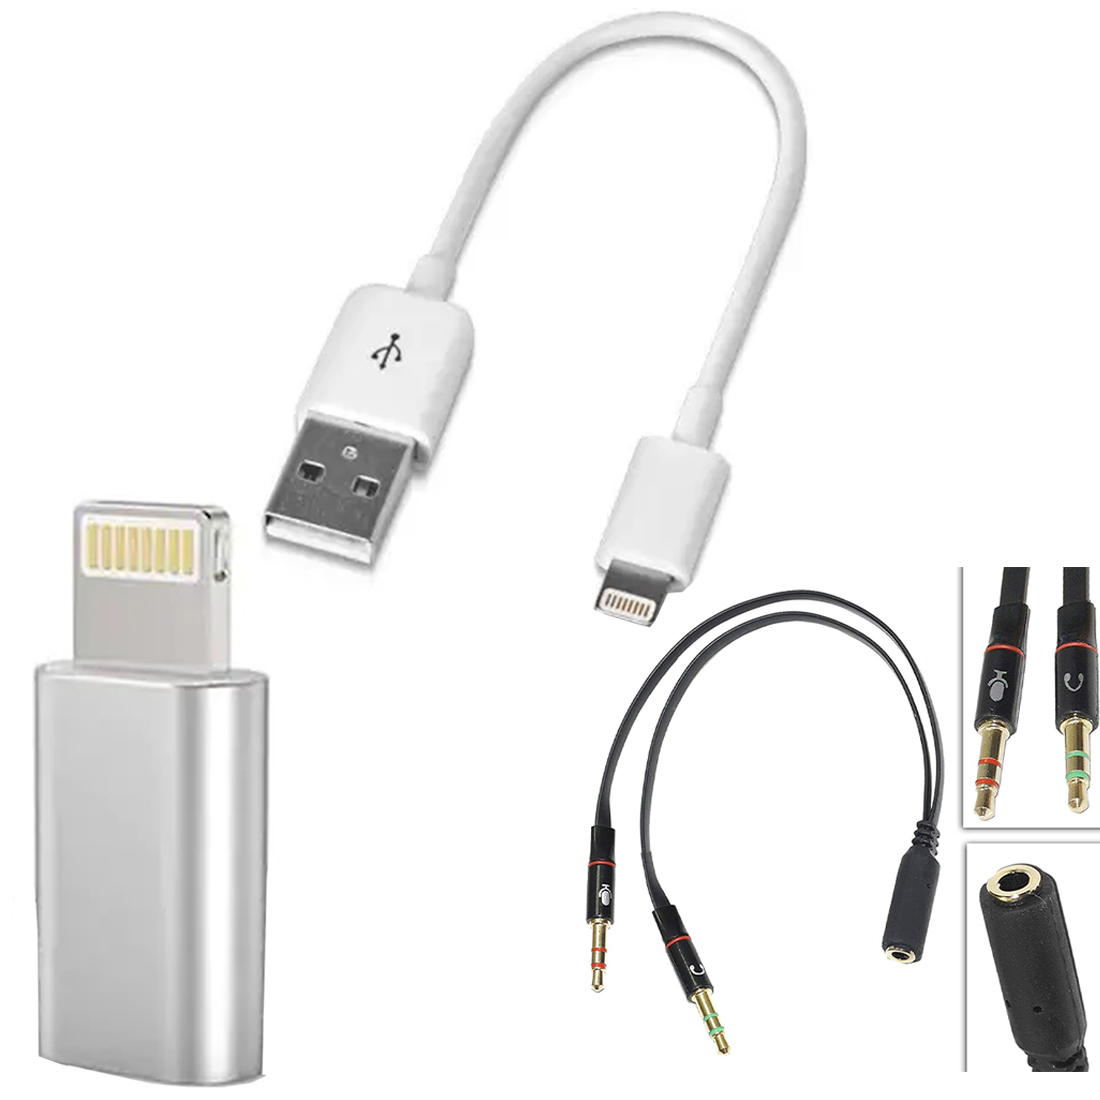 Eshopglee 8 Pin USB Short Charging Cable for i Phone + Micro USB to 8 Pin Adapter + 2 in1 Audio Cable